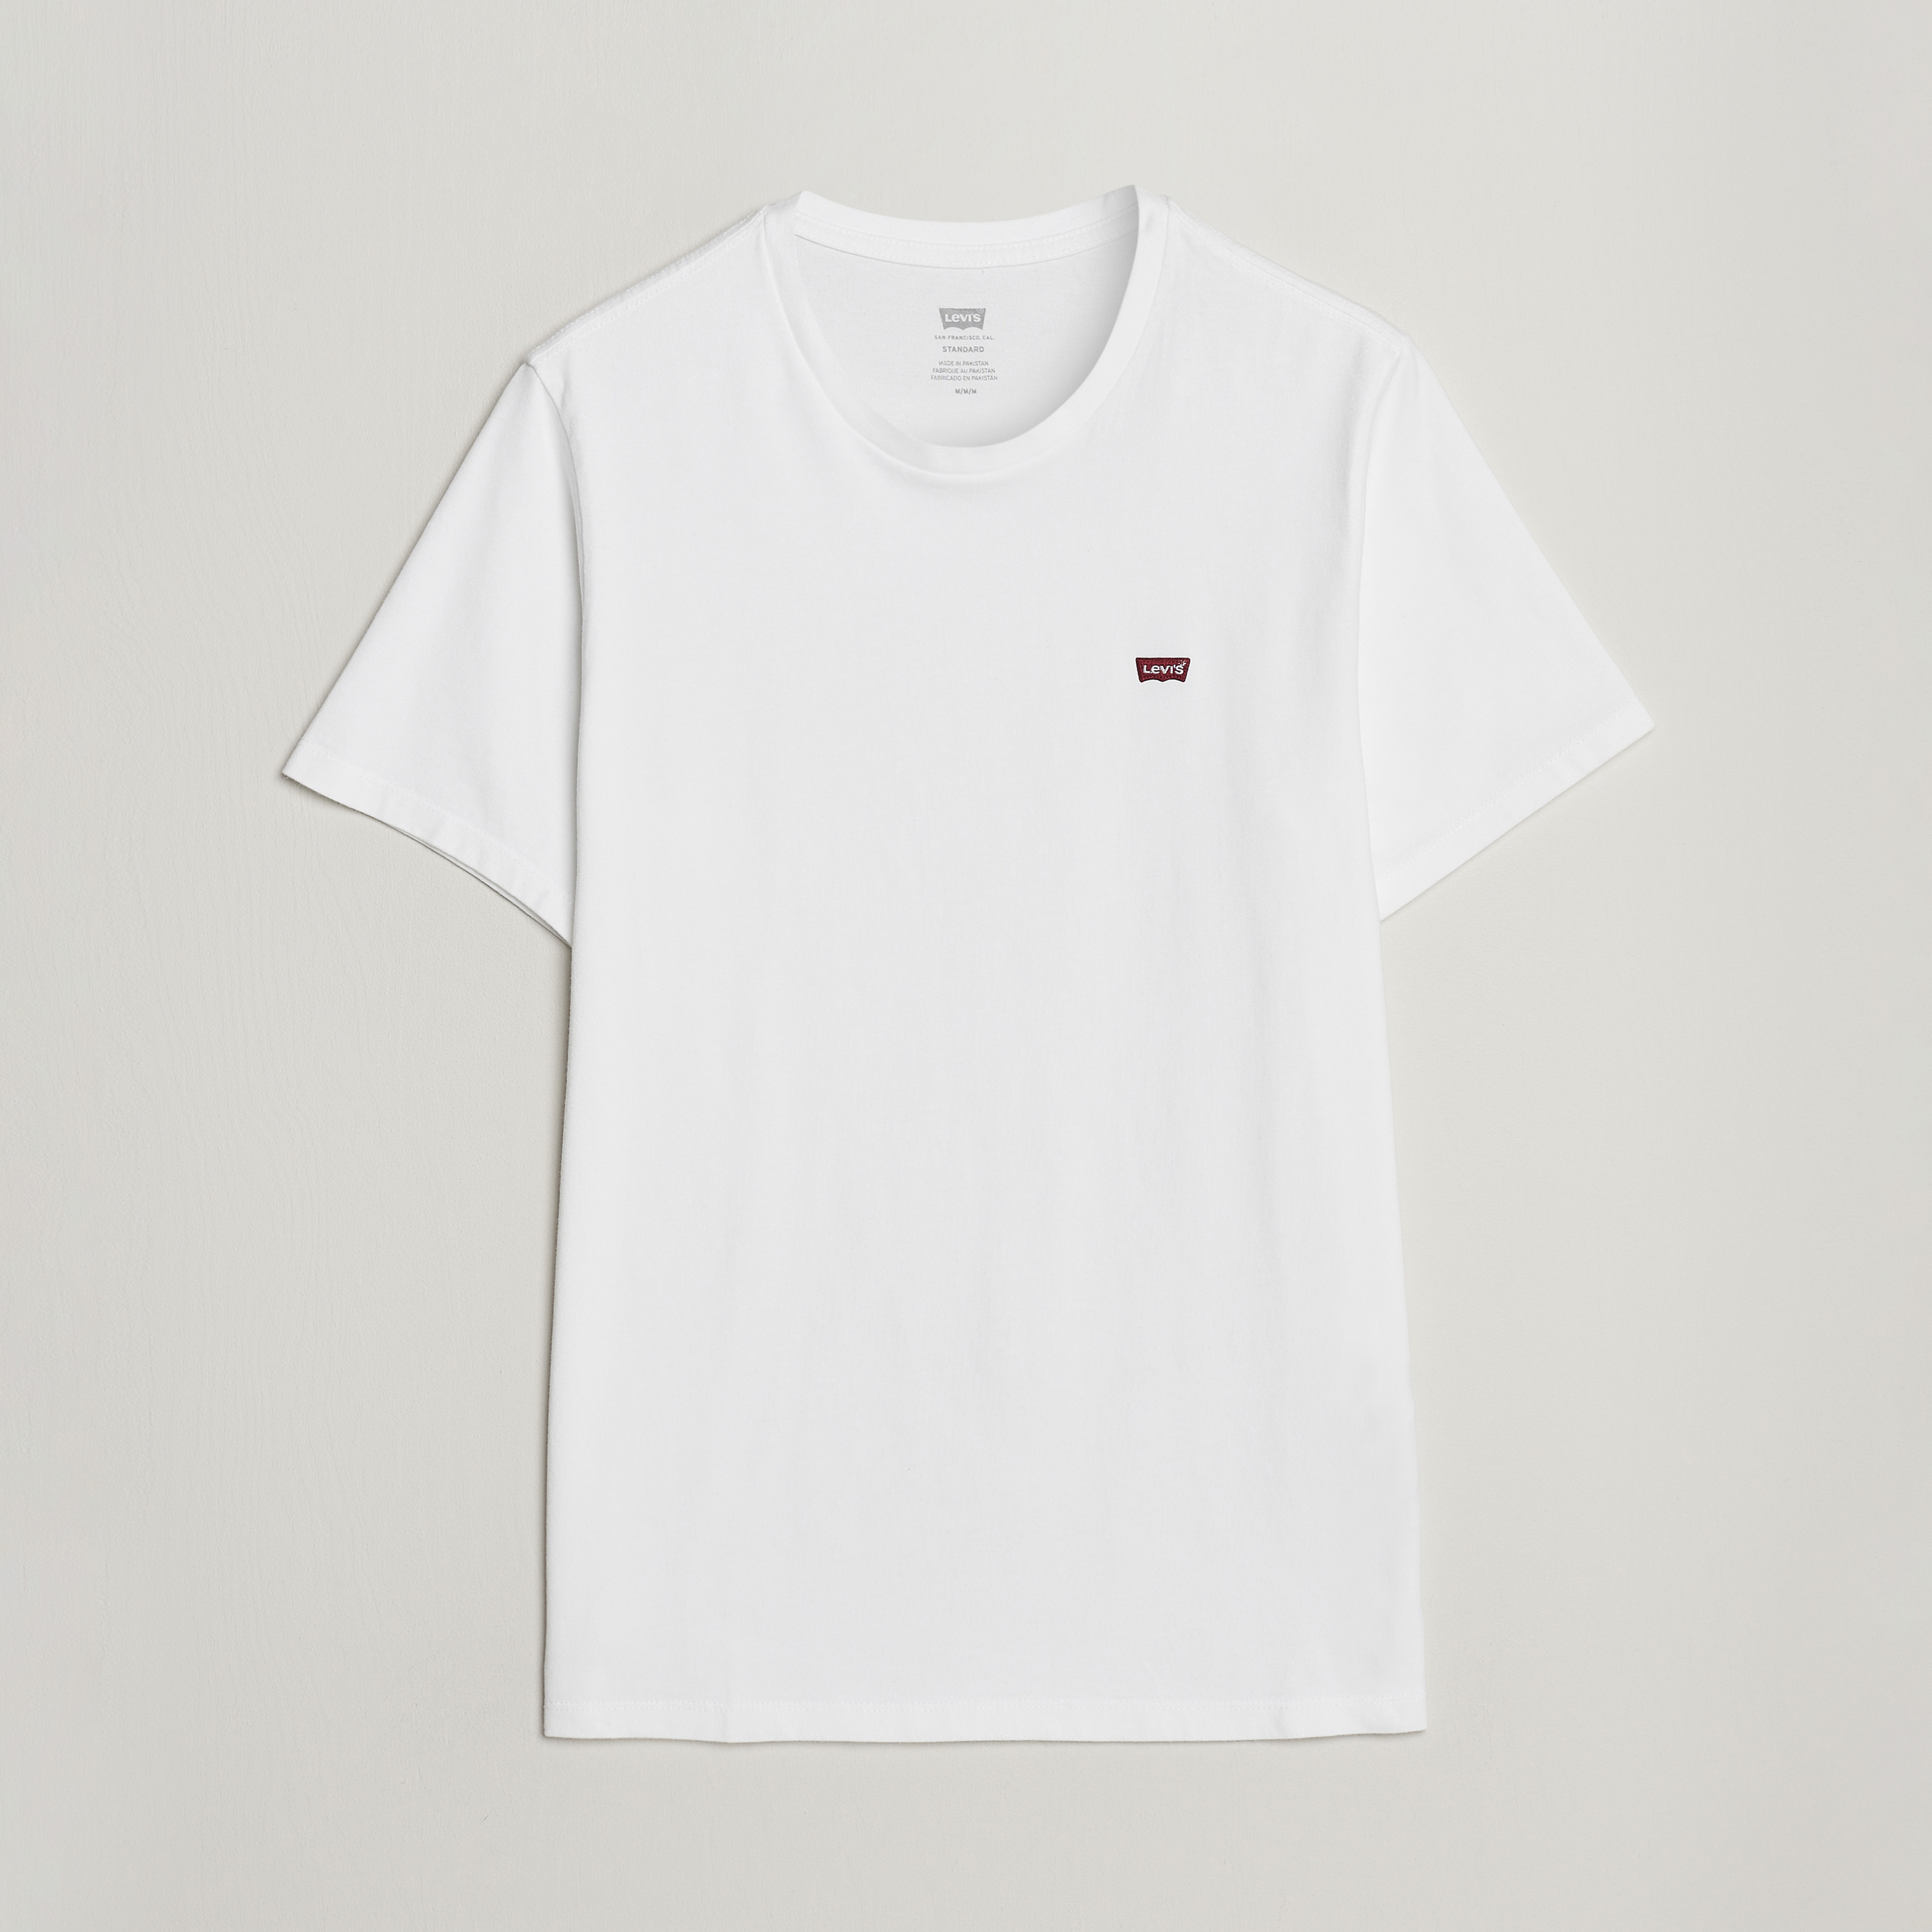 T-SHIRT T-TOGS BLANC - T-shirts & Polos Homme